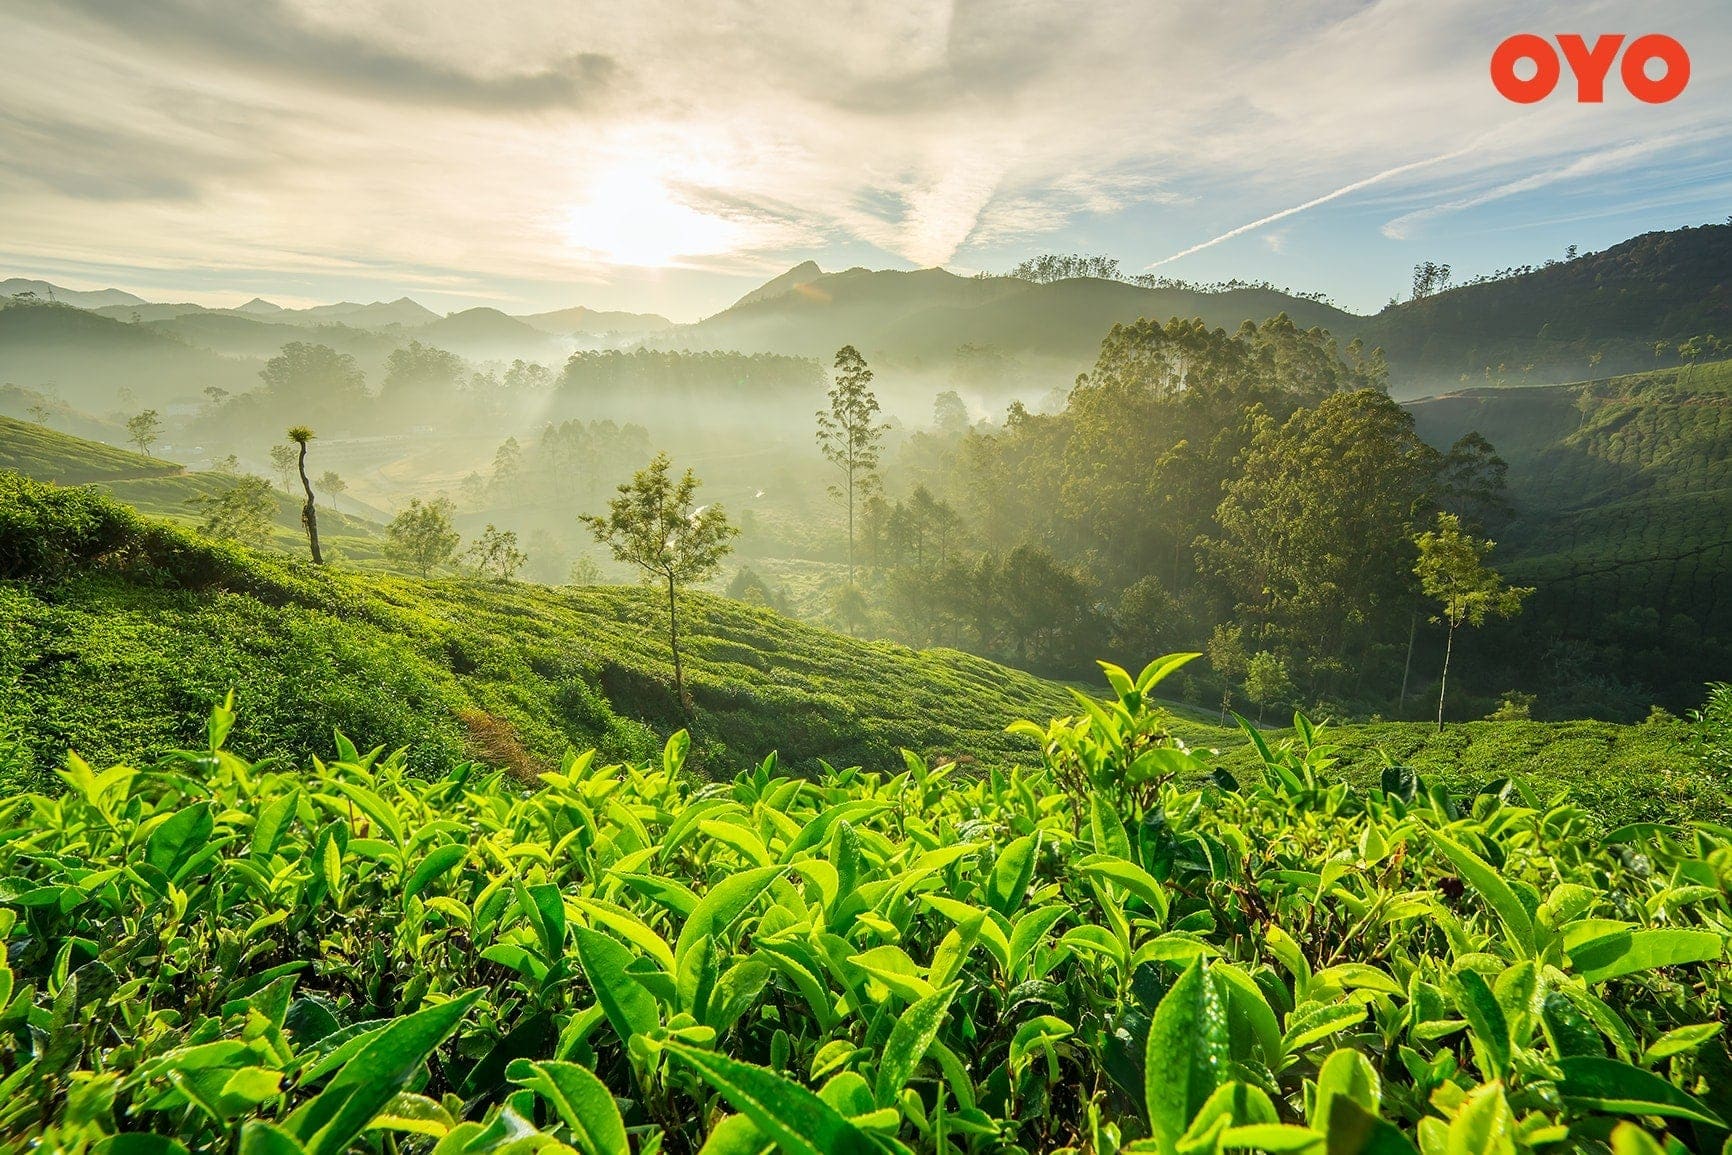 Trek to Munnar - one of the best trekking places in India